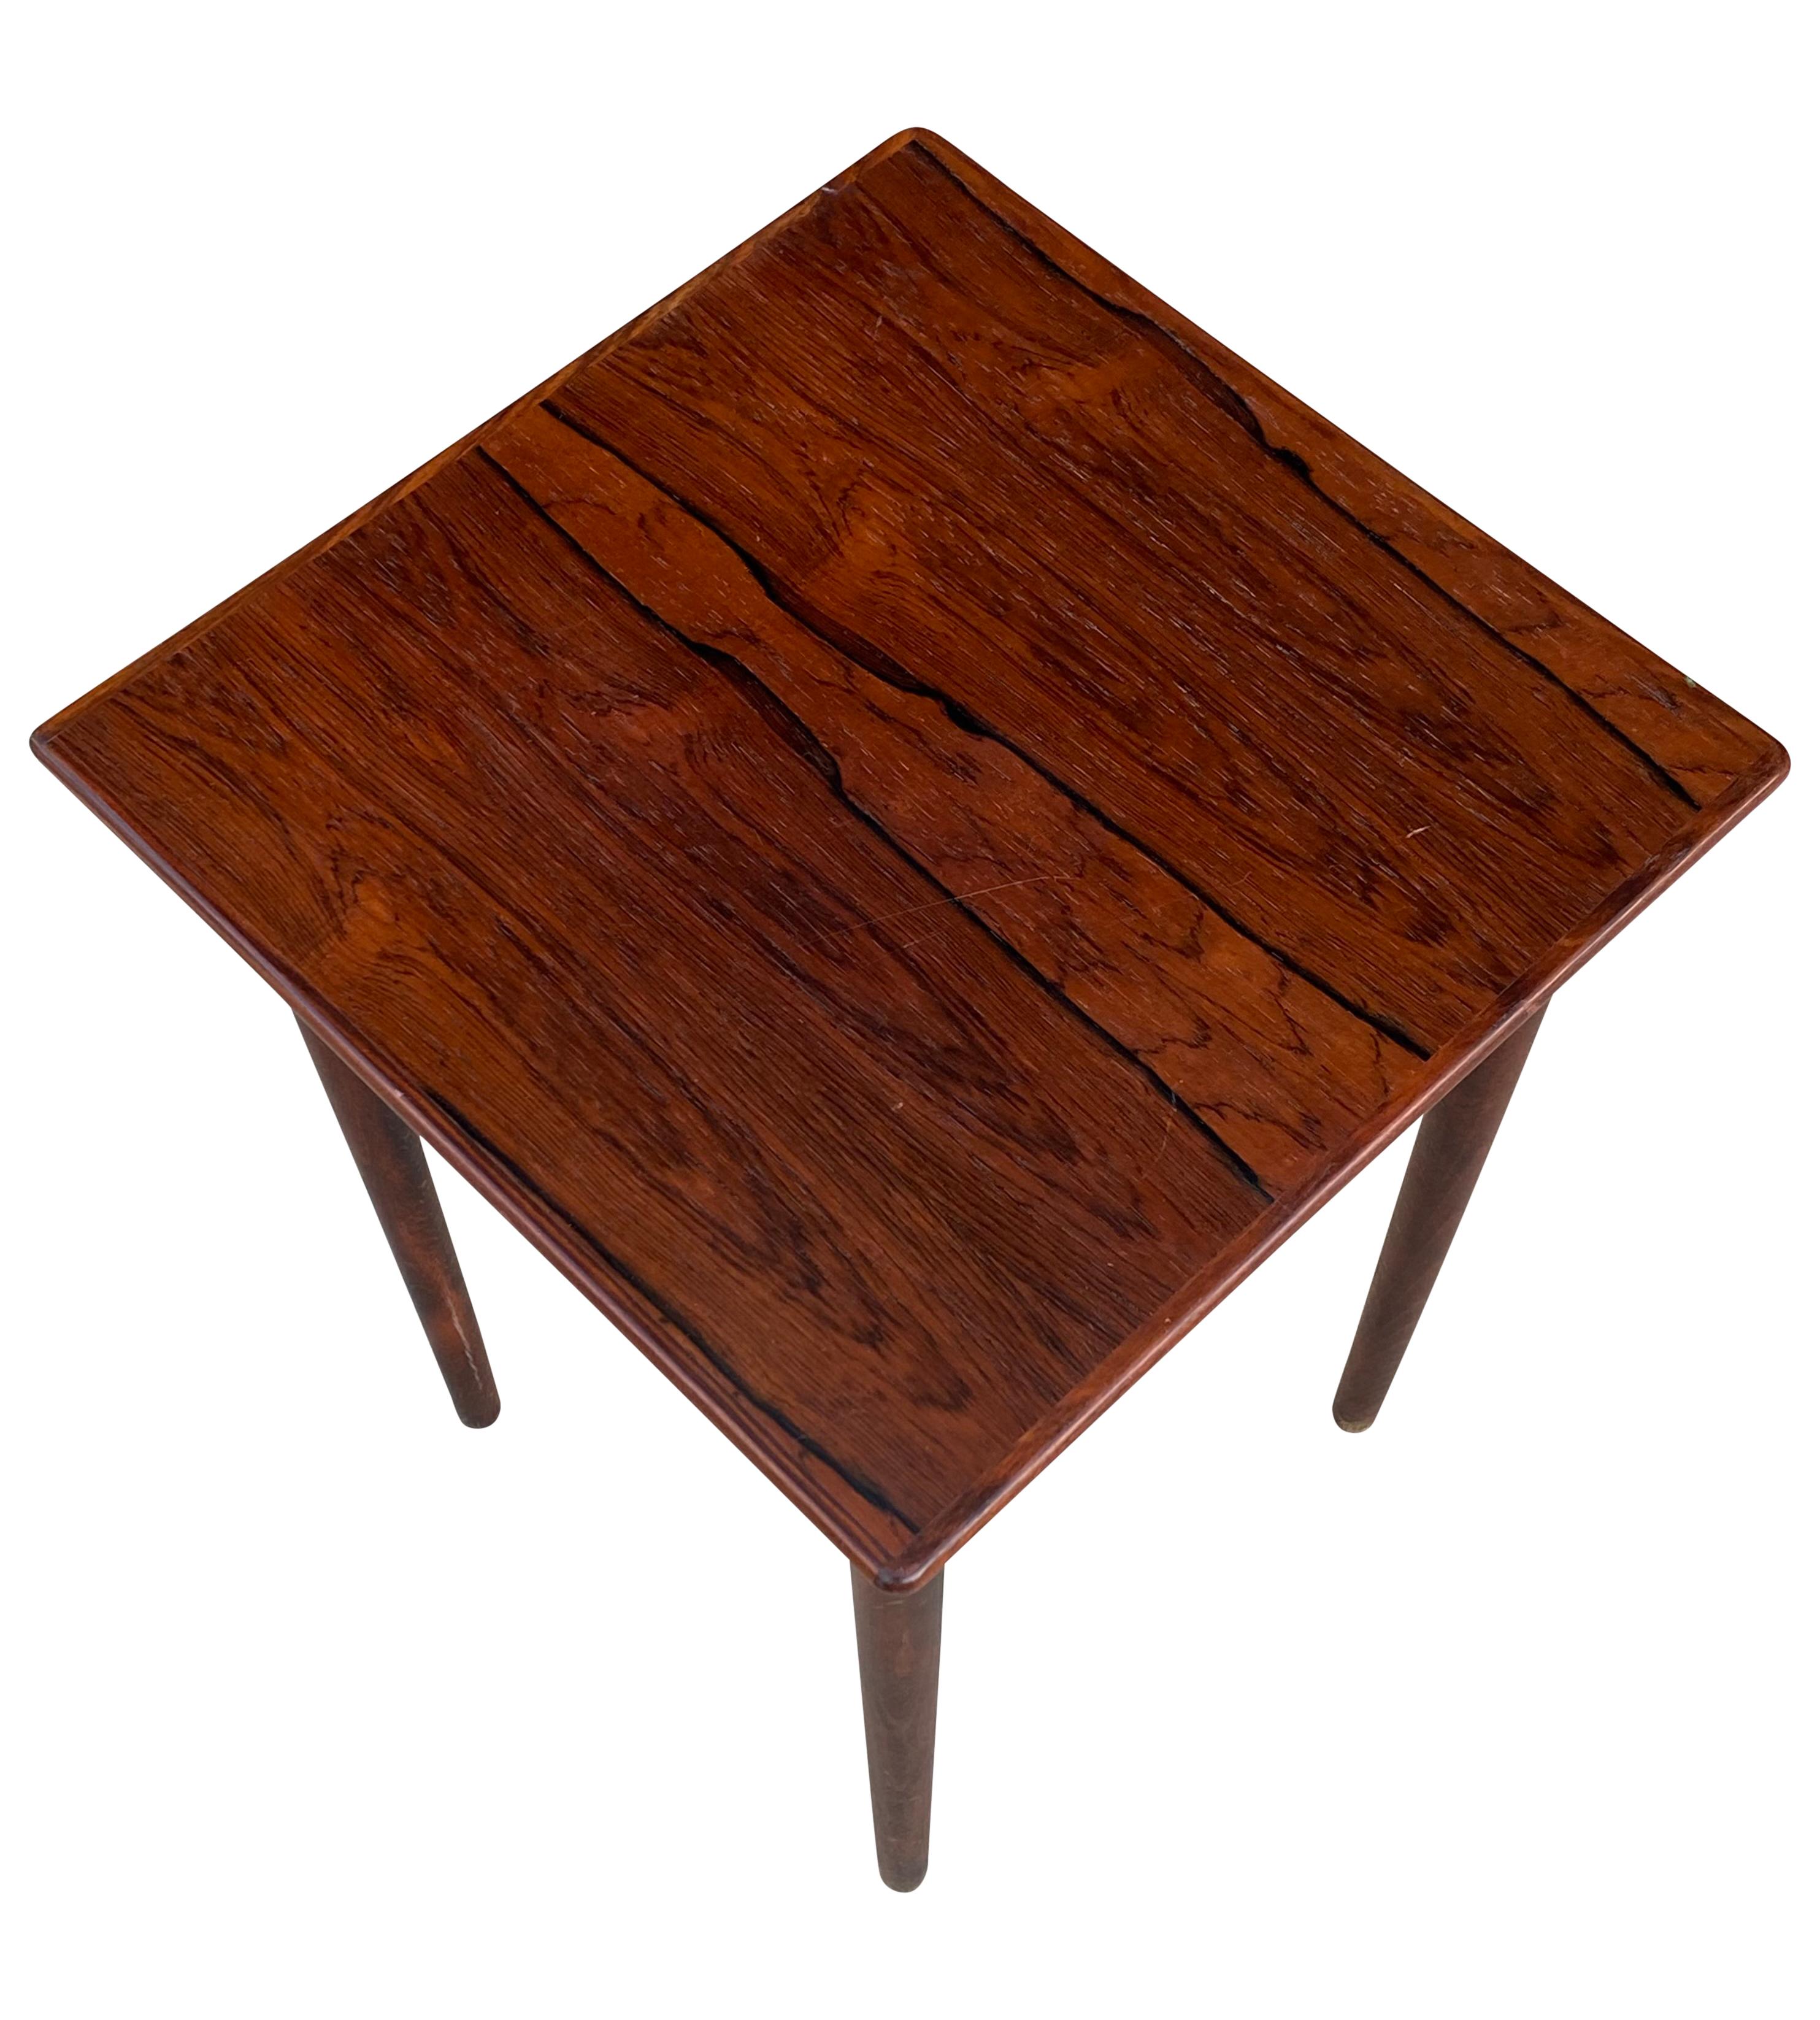 Gorgeous and compact side table made in Norway circa 1960s. Executed in gorgeous Brazilian rosewood with brilliant color and elegant grain pattern. A perfect table for next to a lounge chair or sofa. Minimal age related wear, even color, and no